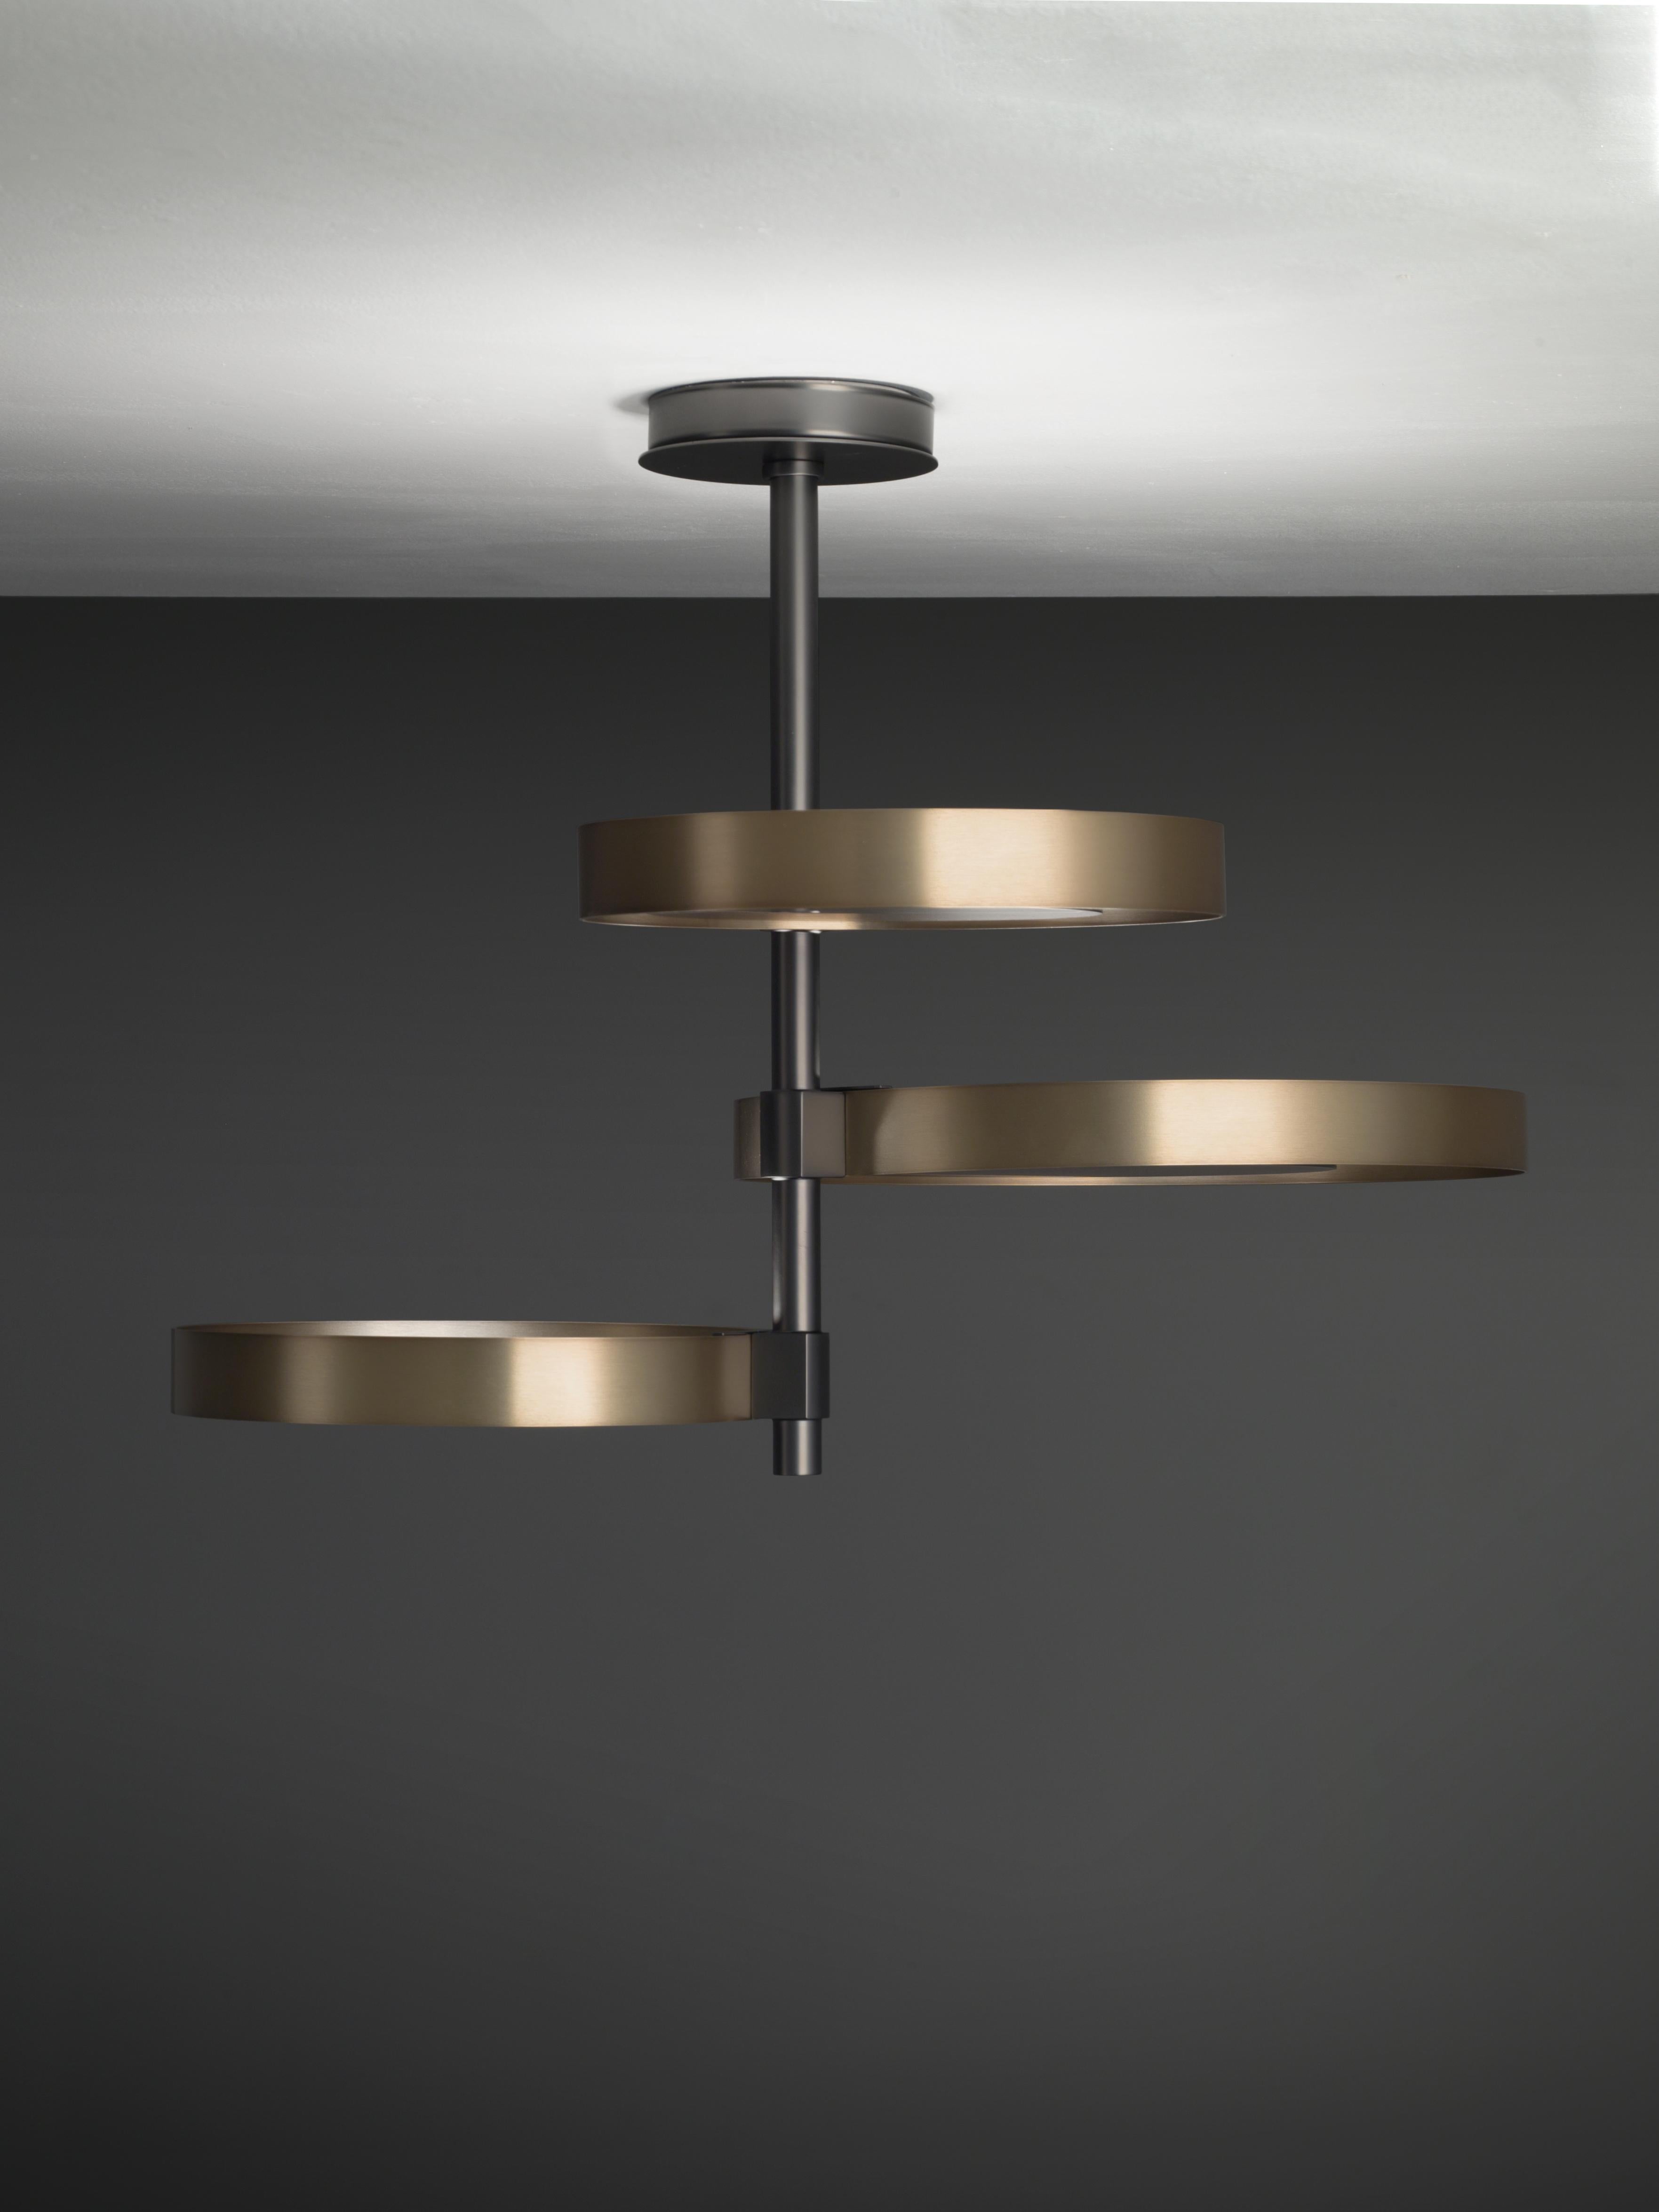 Ceiling lamp with indirect light. Light burnished brass rings and matte black nickel structure.

Location: Interior
Light source: 3 × 17W 1500lm 2700°K CRI90
Voltage: 110 - 120 V / 220 - 240 V
Frequency: 50 - 60 Hz
Dimmable: Yes
Mounting: